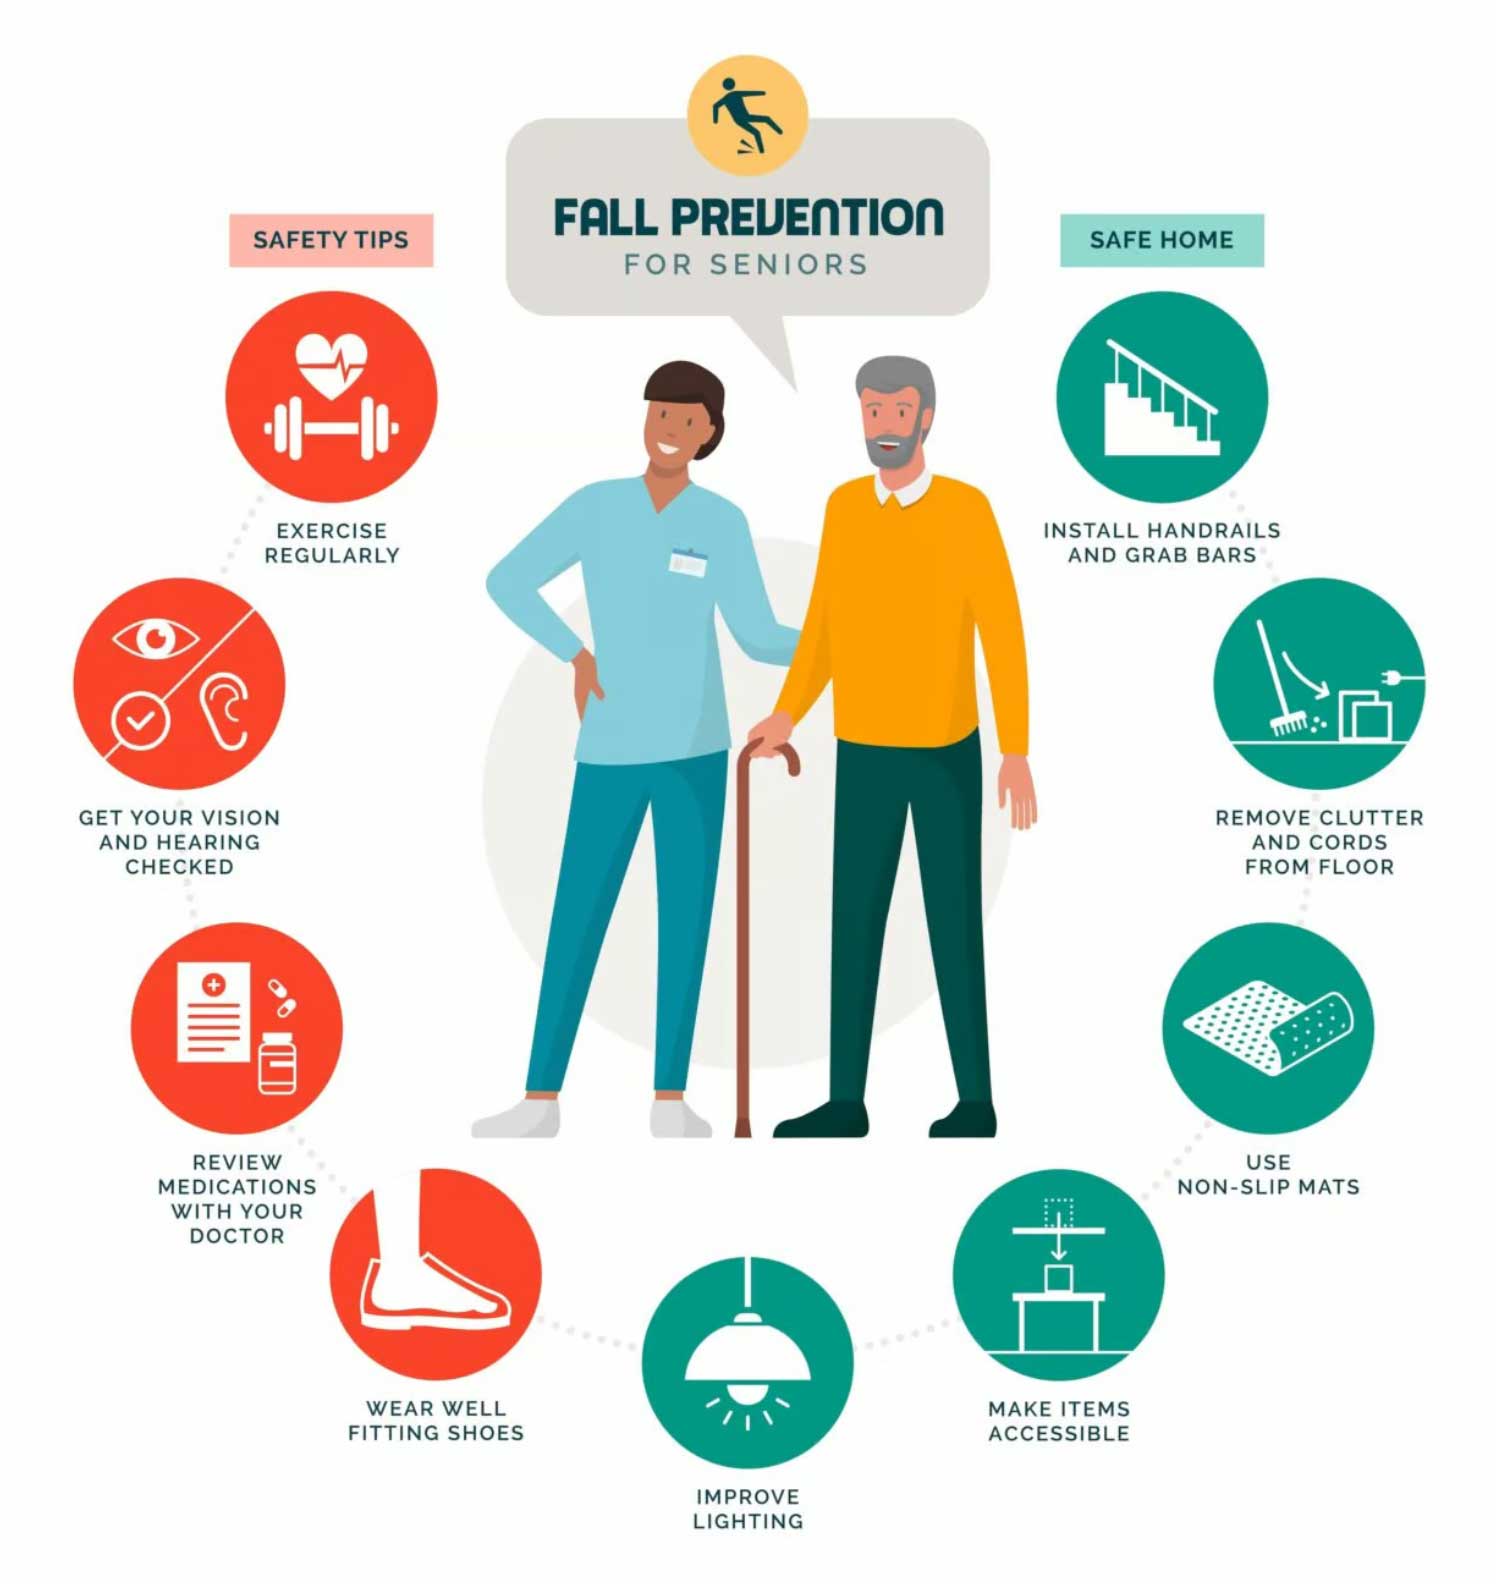 Fall prevention tips